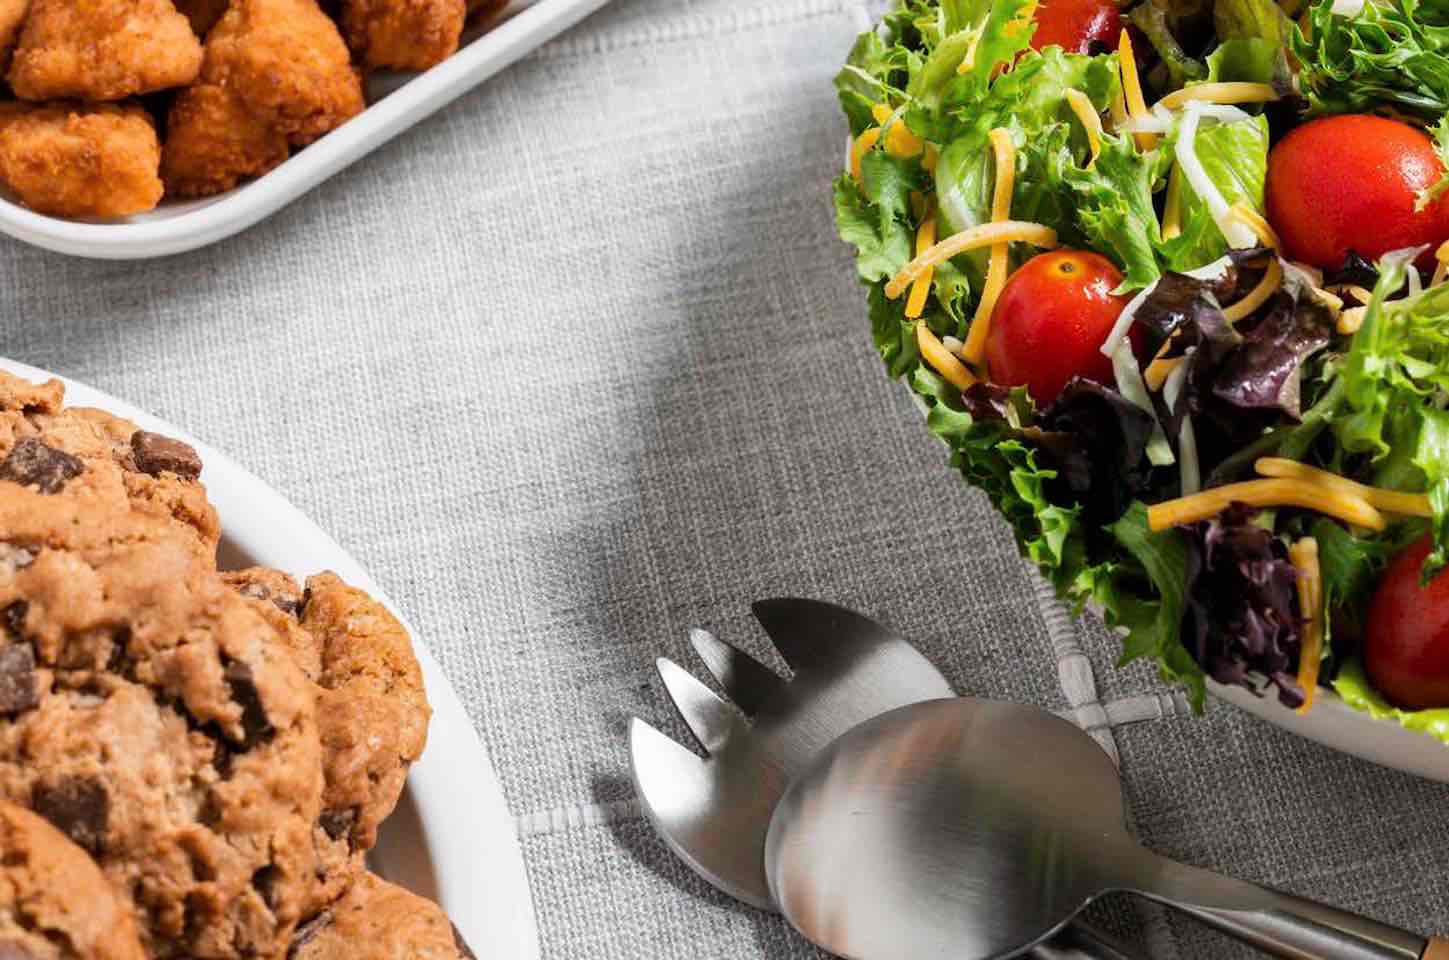 A Chick-fil-A catering order which includes trays of Side Salad, Chocolate Chunk Cookies and Chick-fil-A Nuggets.